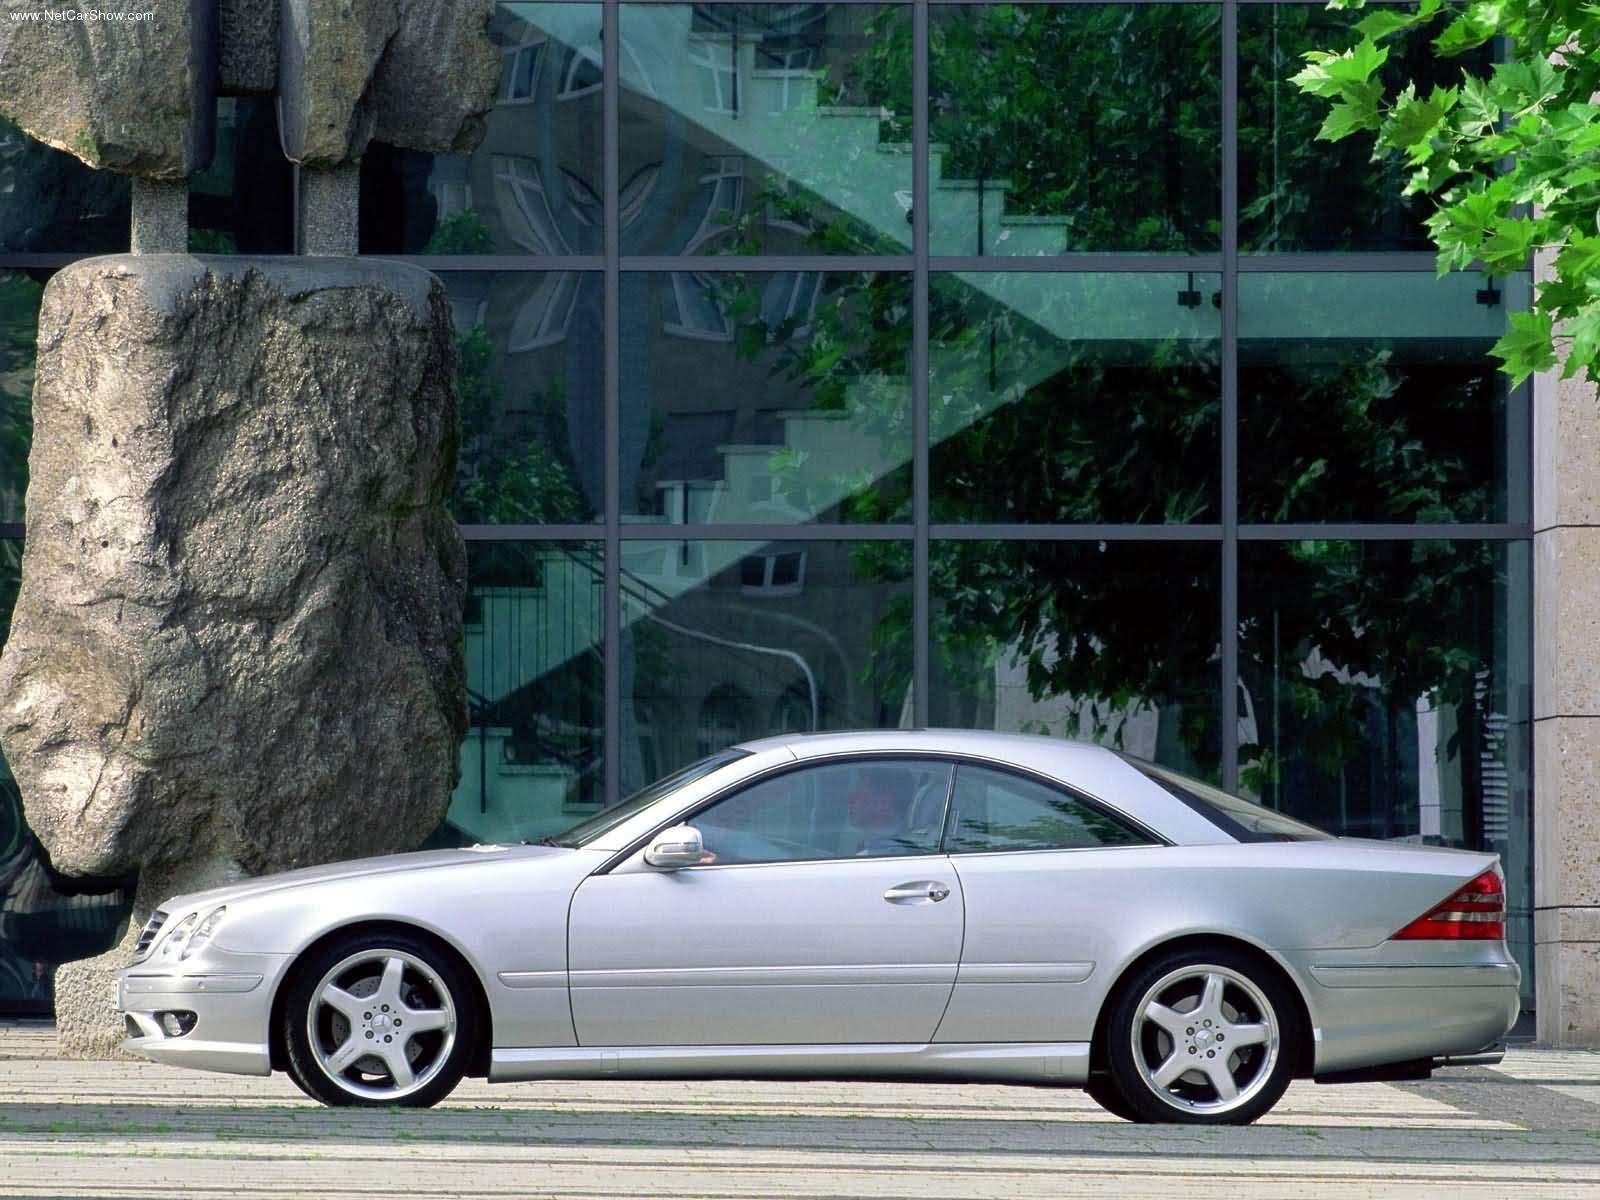 mercedes benz, Cl55, Amg, Cars, Coupe, 2000 Wallpaper